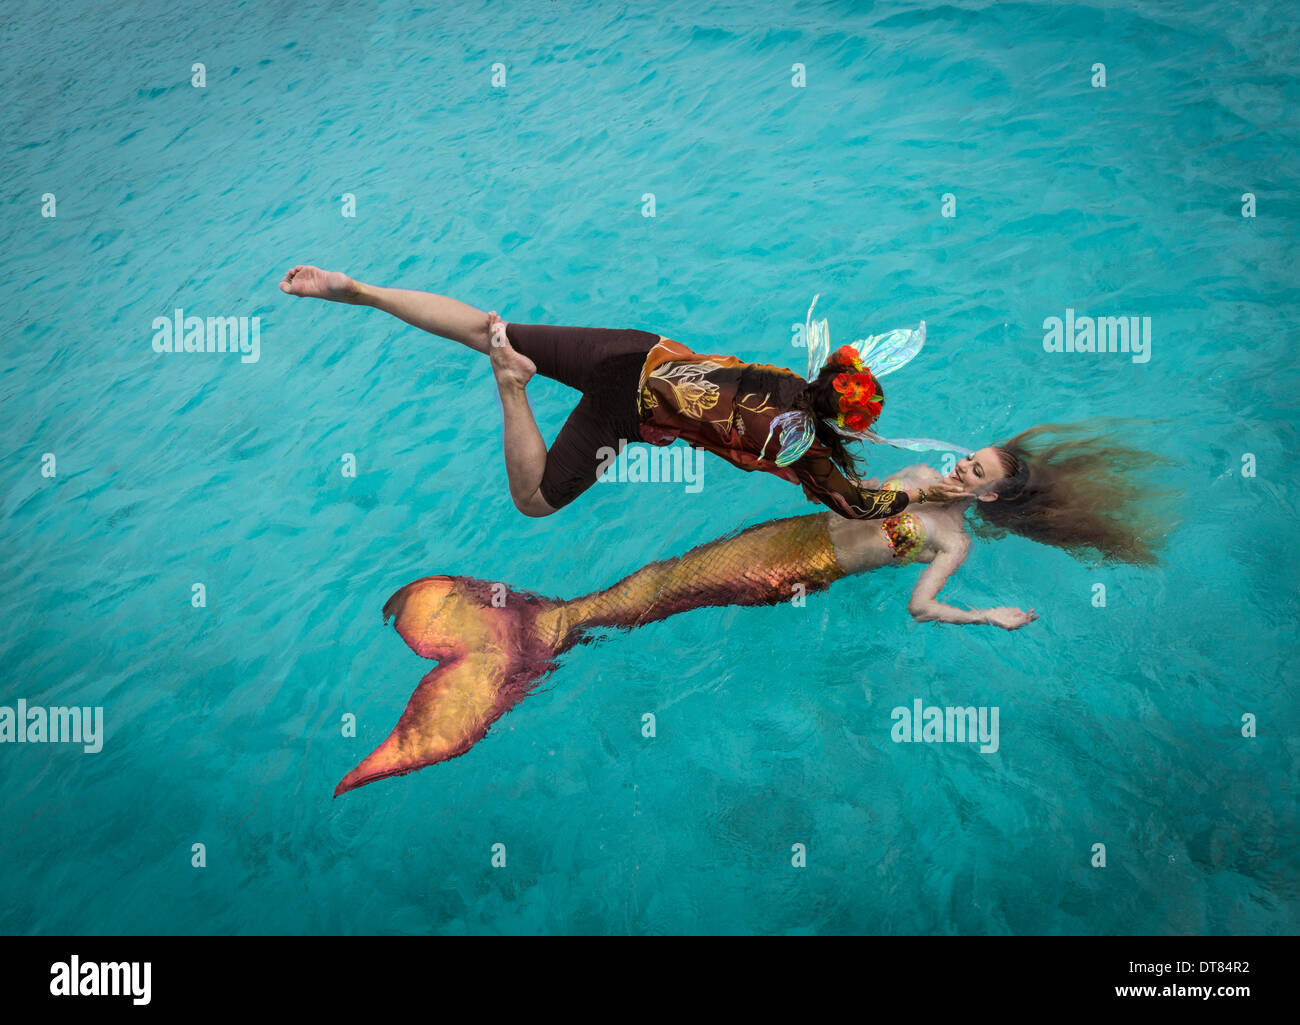 Faerie flies down to see a mermaid floating at water's surface, Exuma Cays, Bahamas Islands Stock Photo